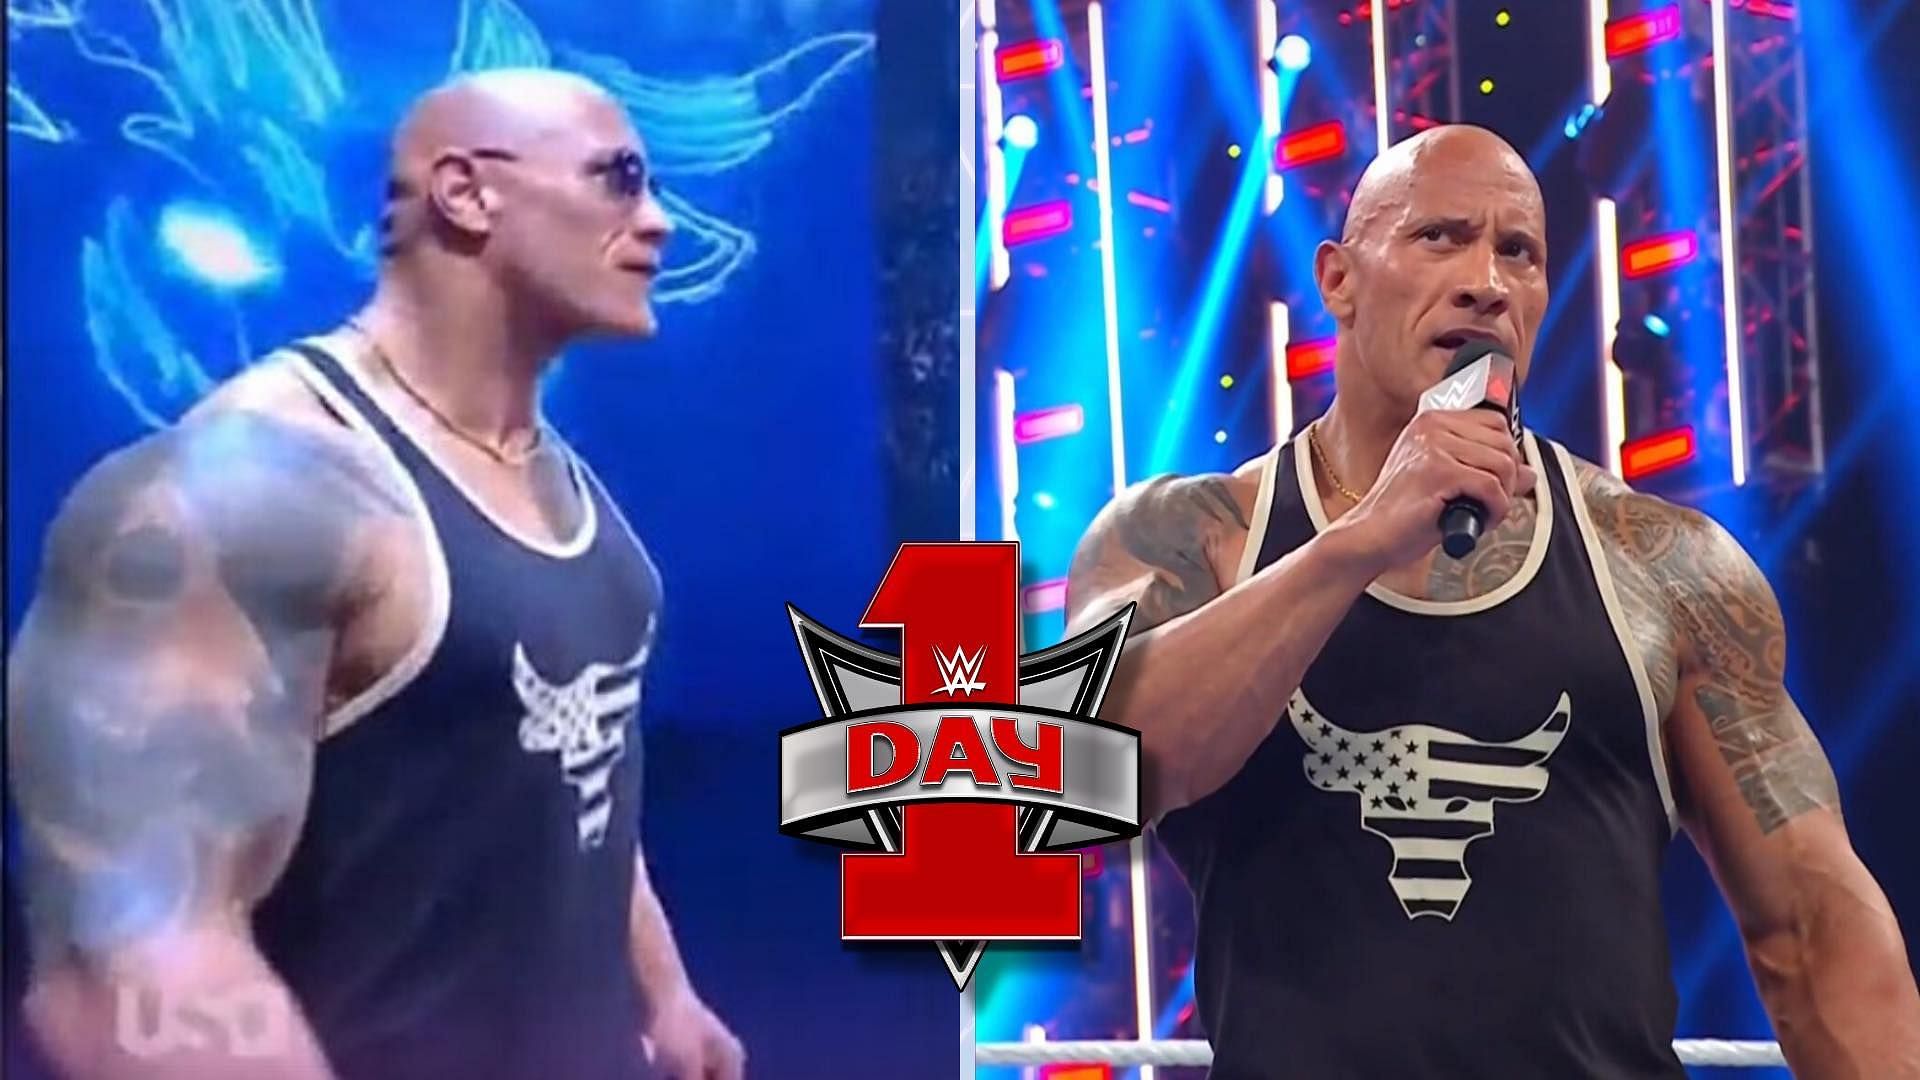 The Rock returned to WWE at RAW: Day 1.